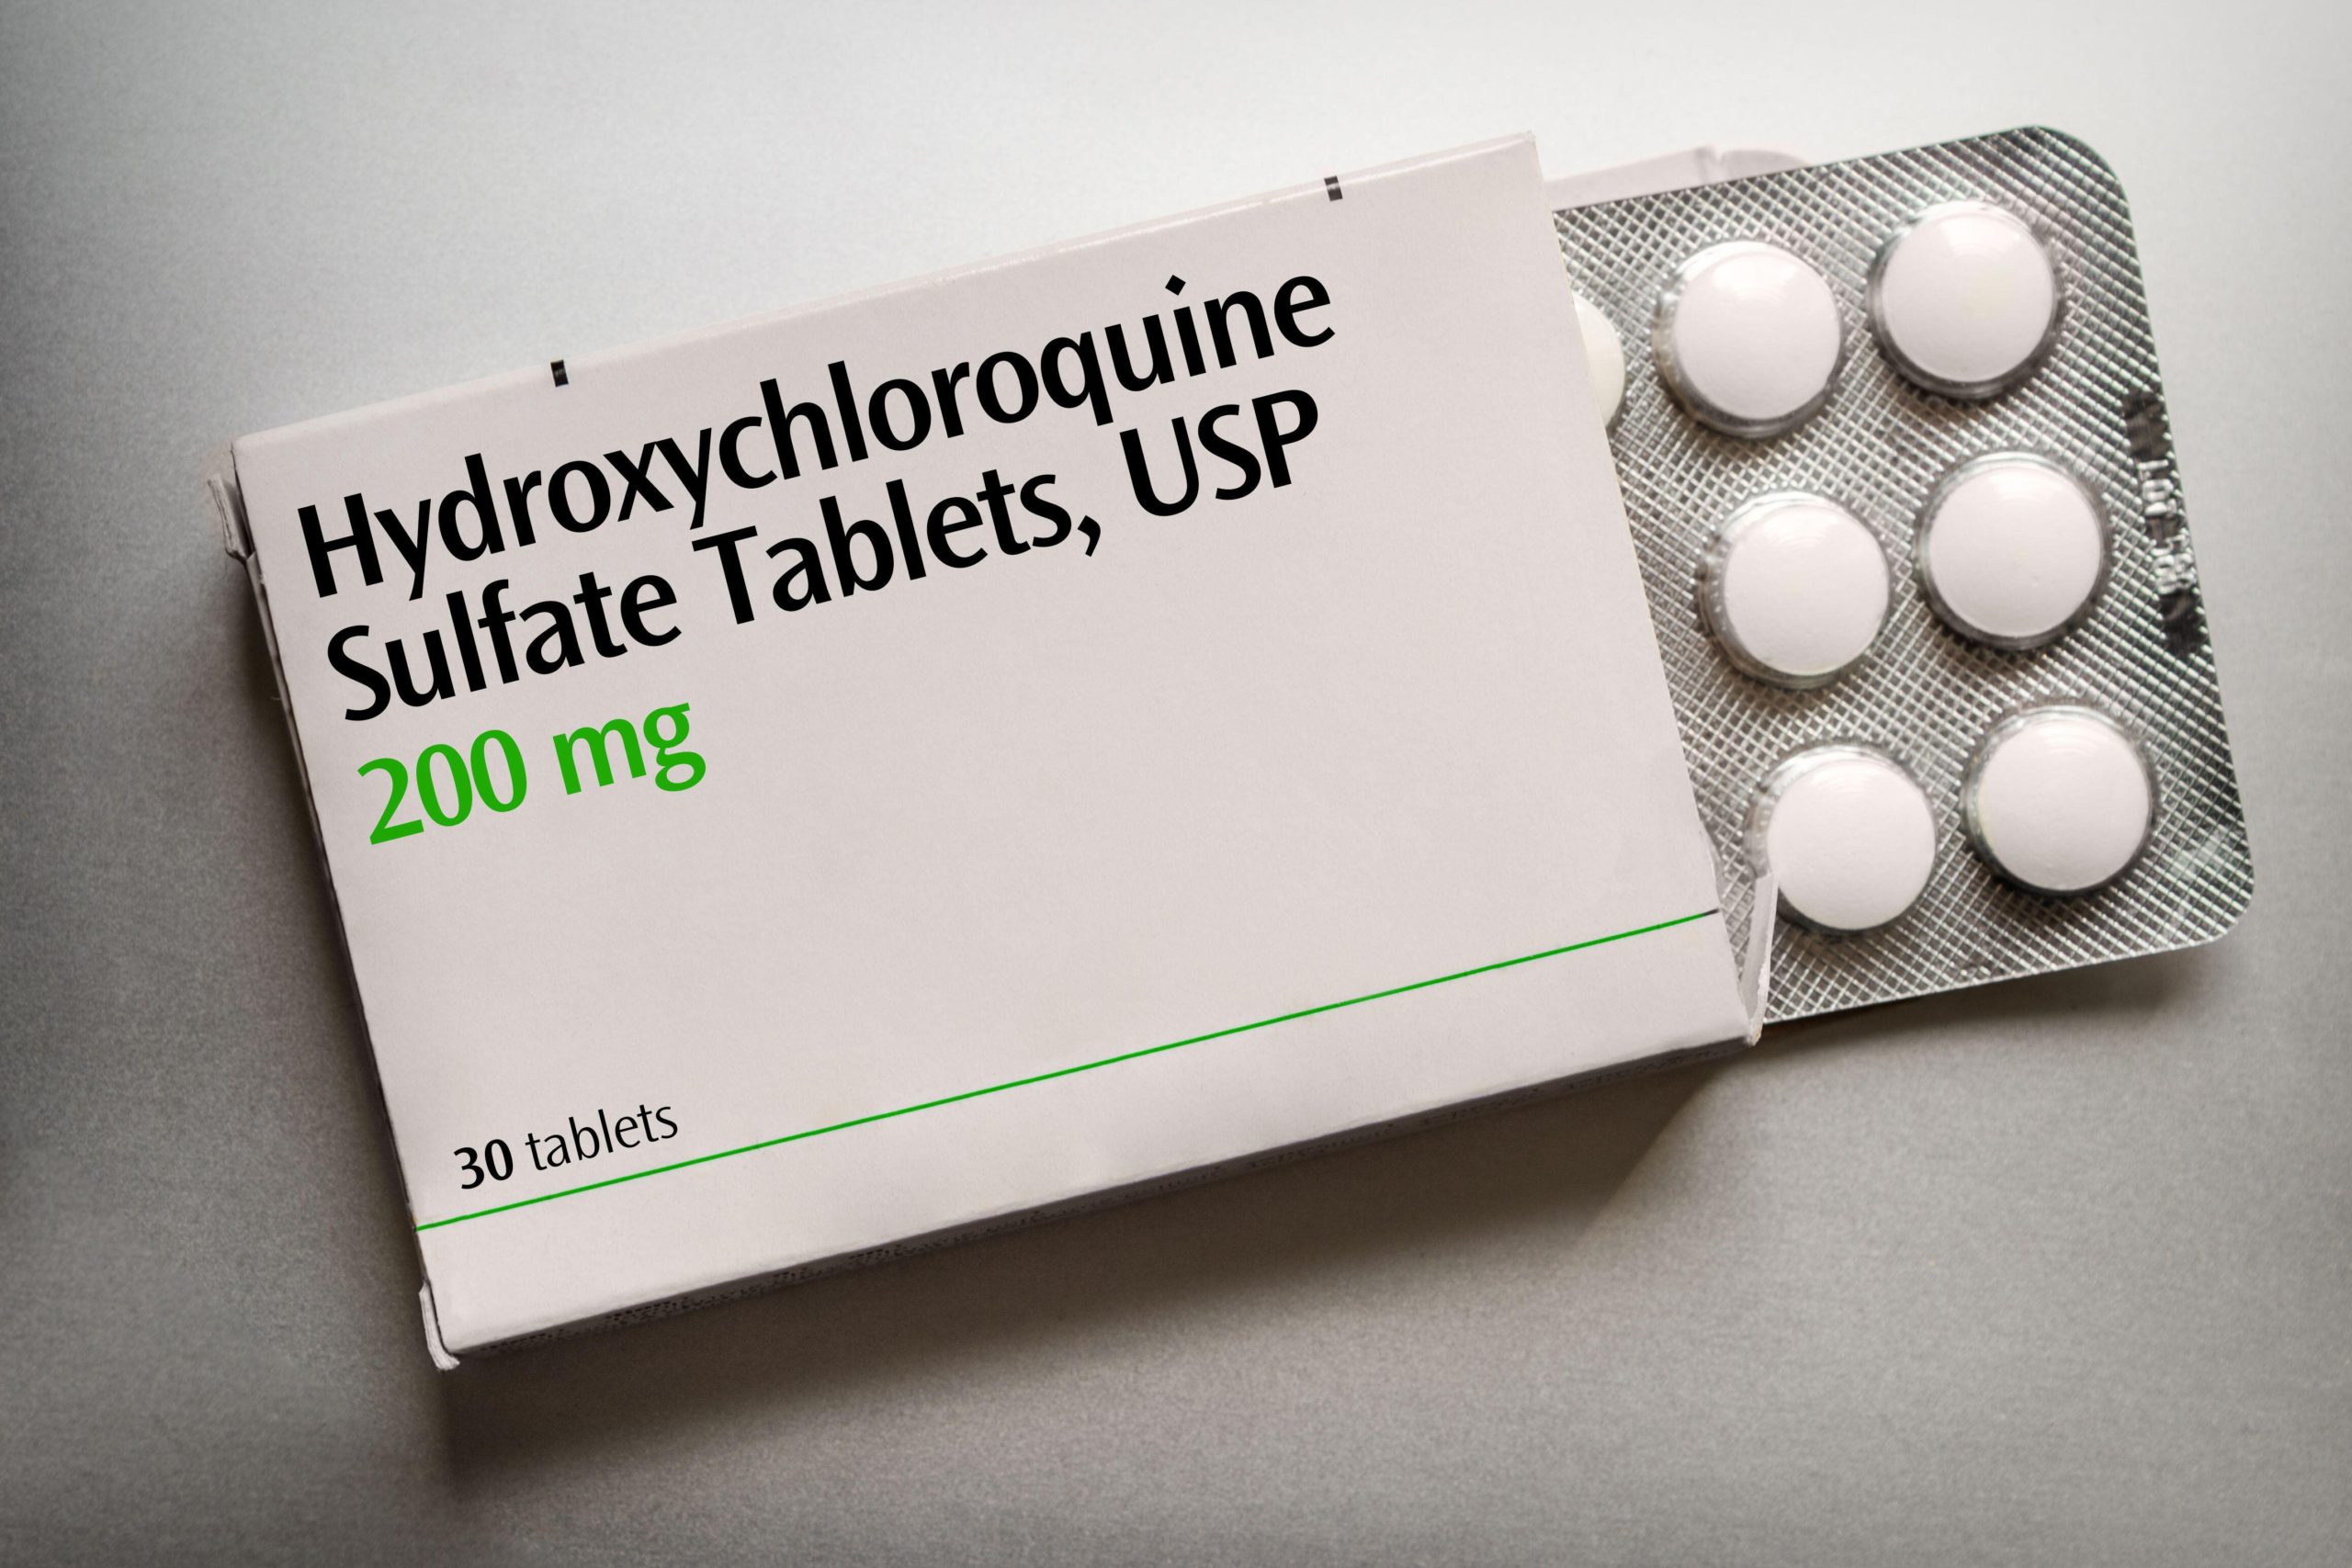 Manufacturer to move hydroxychloroquine production to the UK to avoid  shortages - The Pharmaceutical Journal